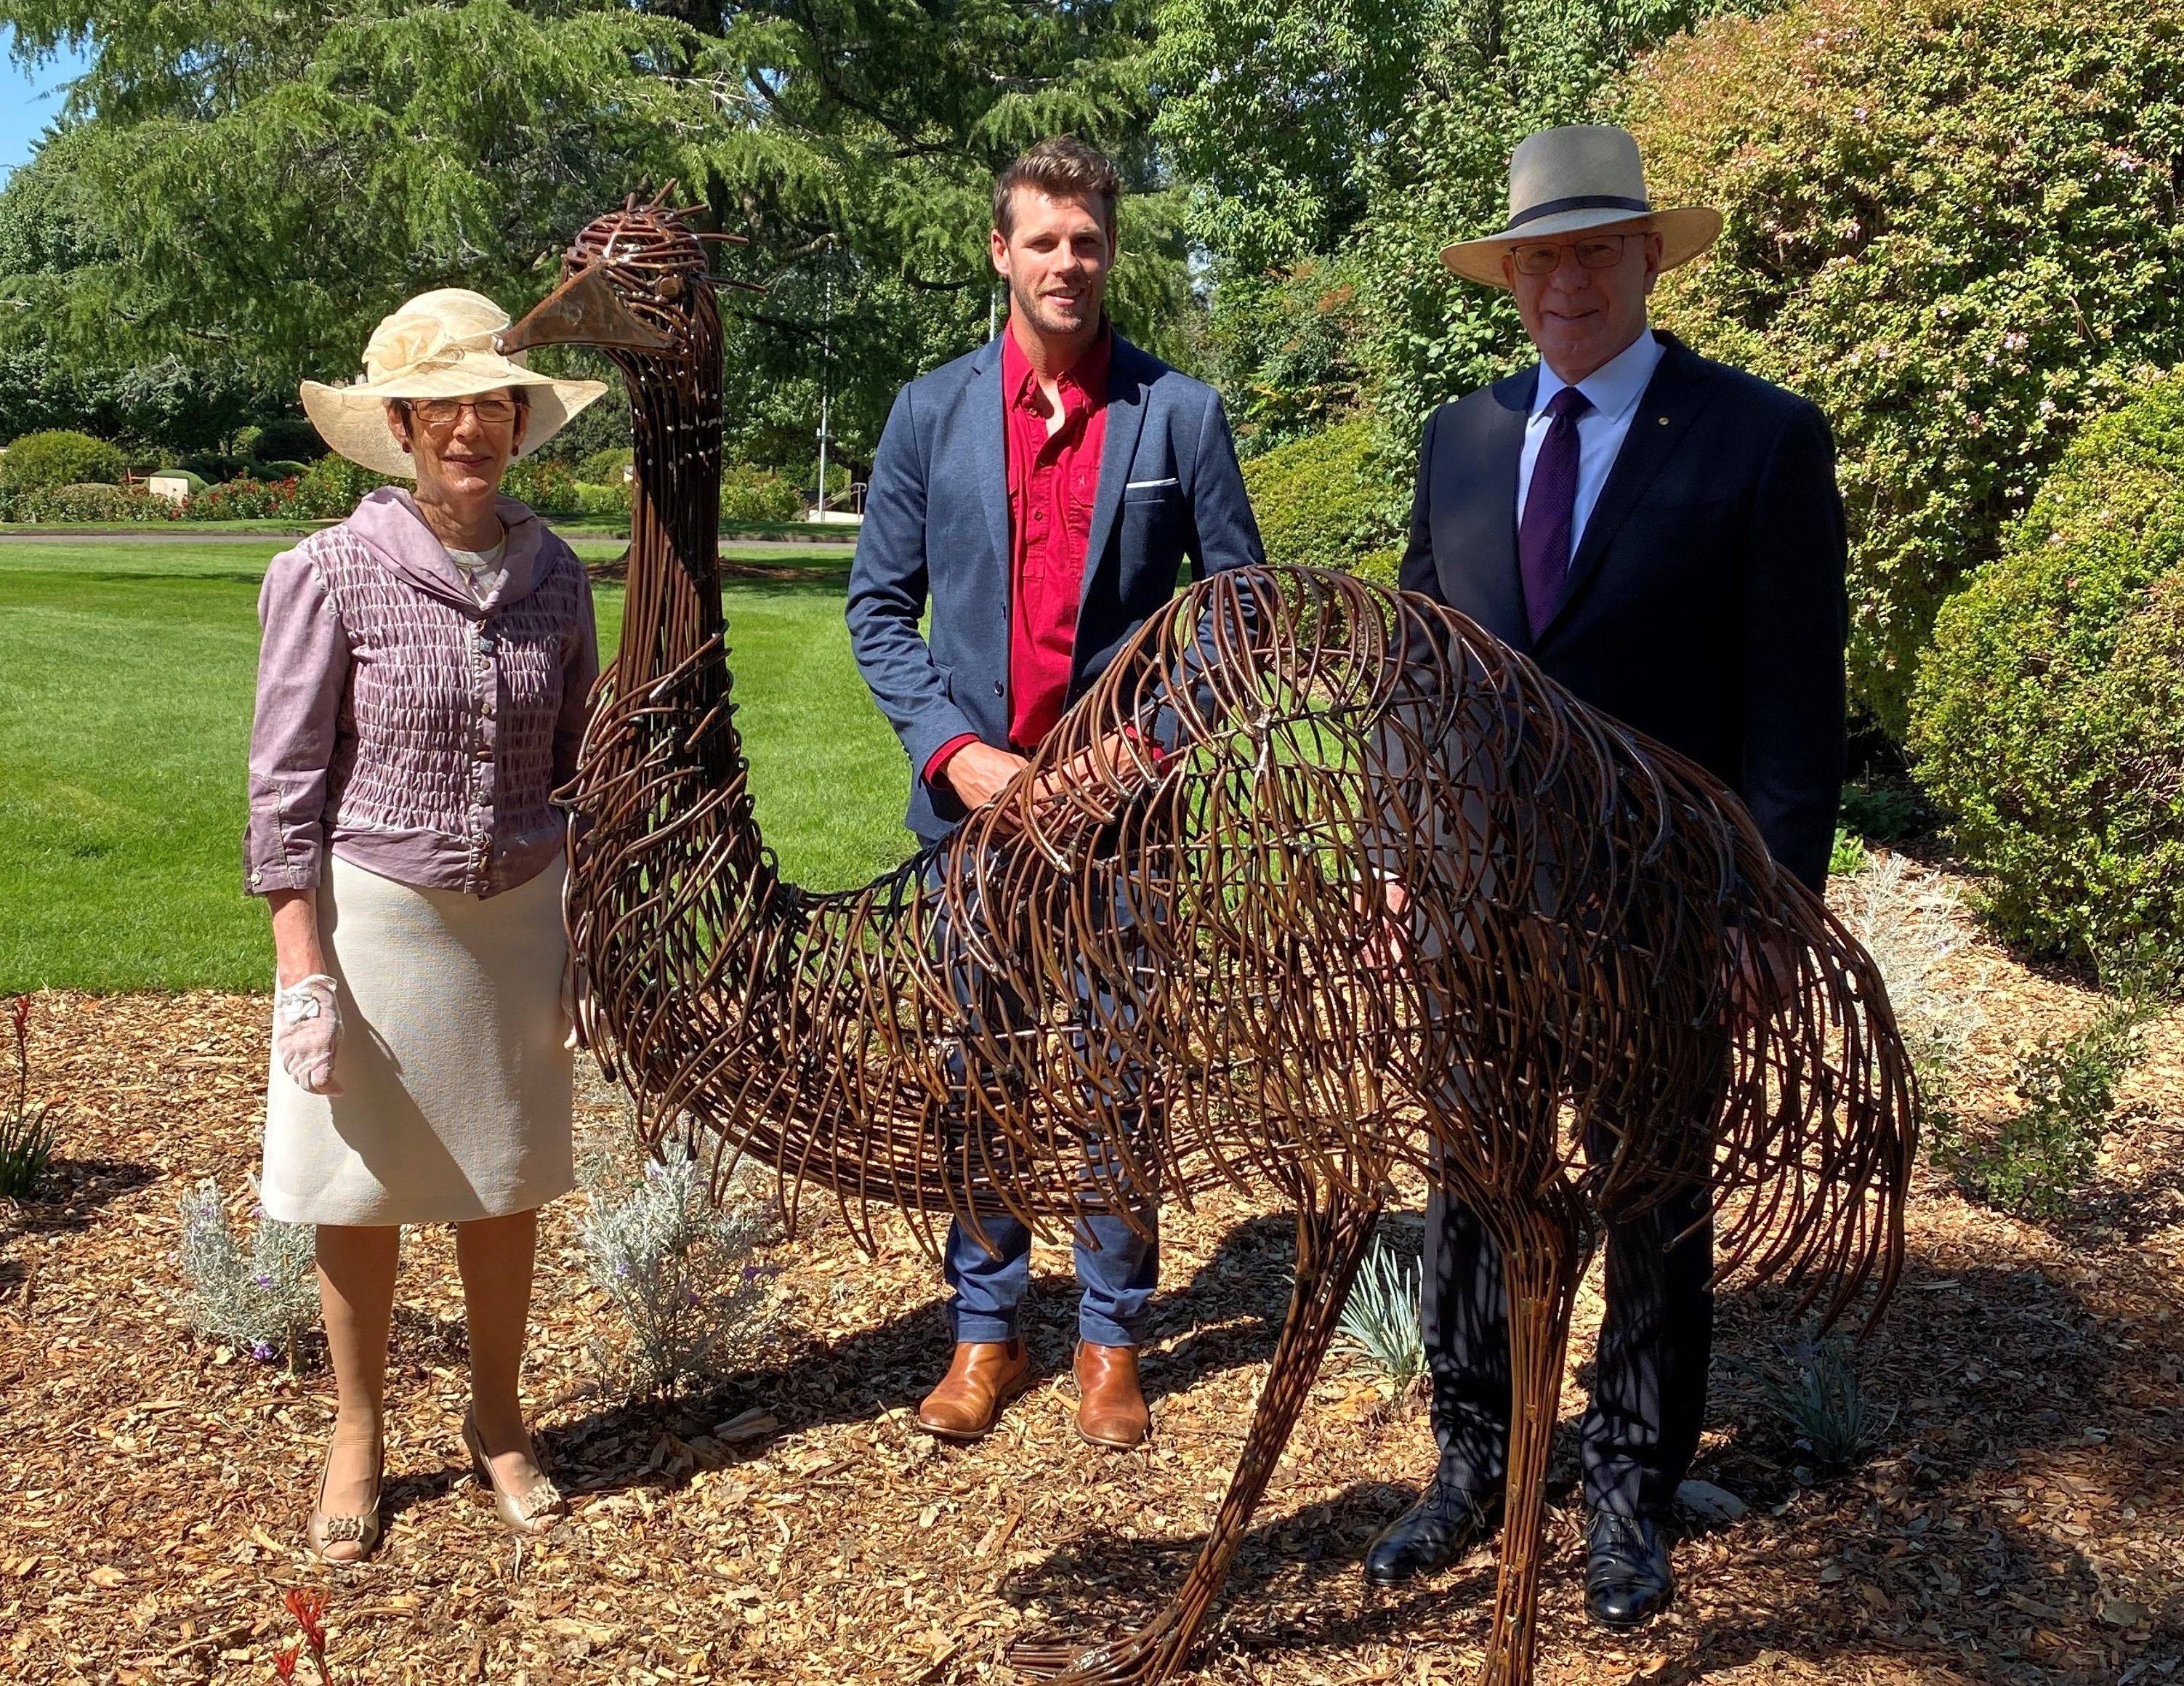 Gifted sculptor's 'relaxed' work unveiled at Government House